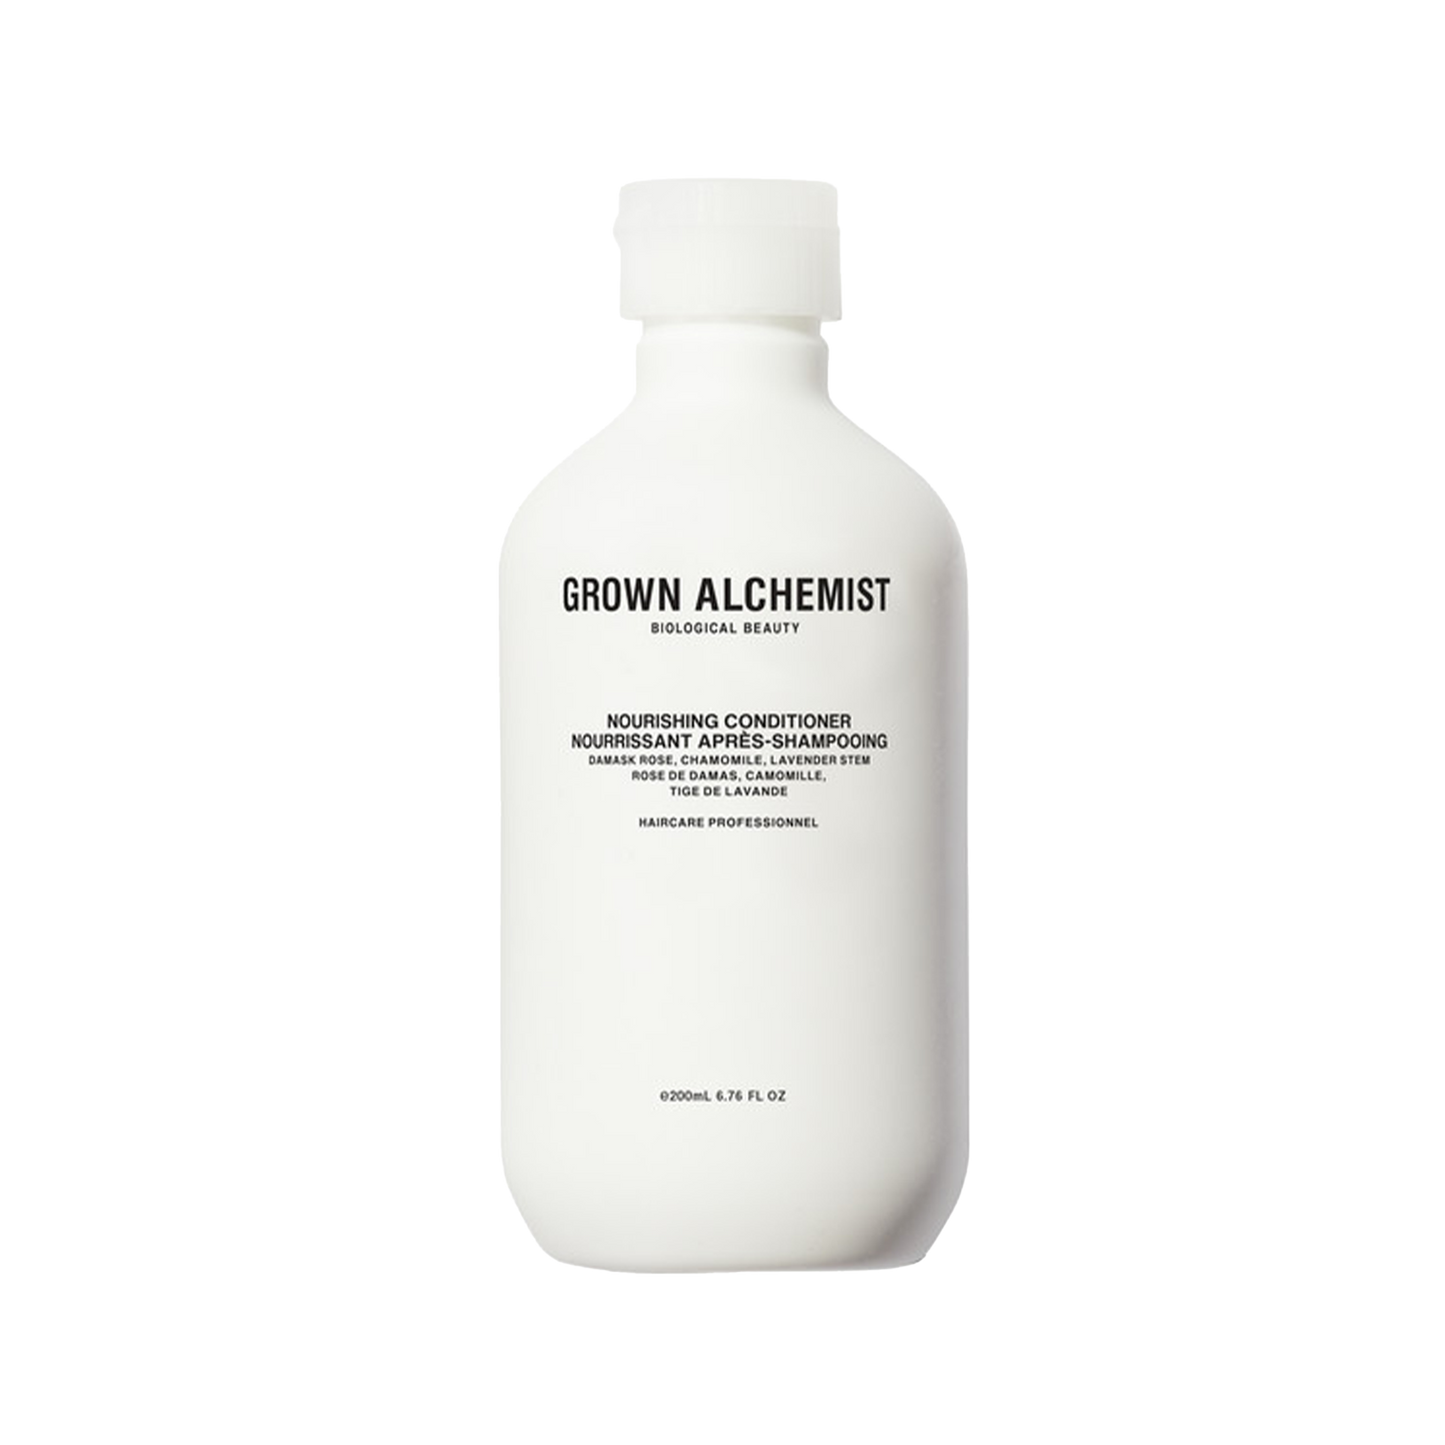 Grown Alchemist Nourishing - Conditioner 0.6: A highly effective conditioner that is perfect for everyday use. It helps maintain and enhance a healthier shine, strengthening, detangling, and softening while protecting the hair shaft.